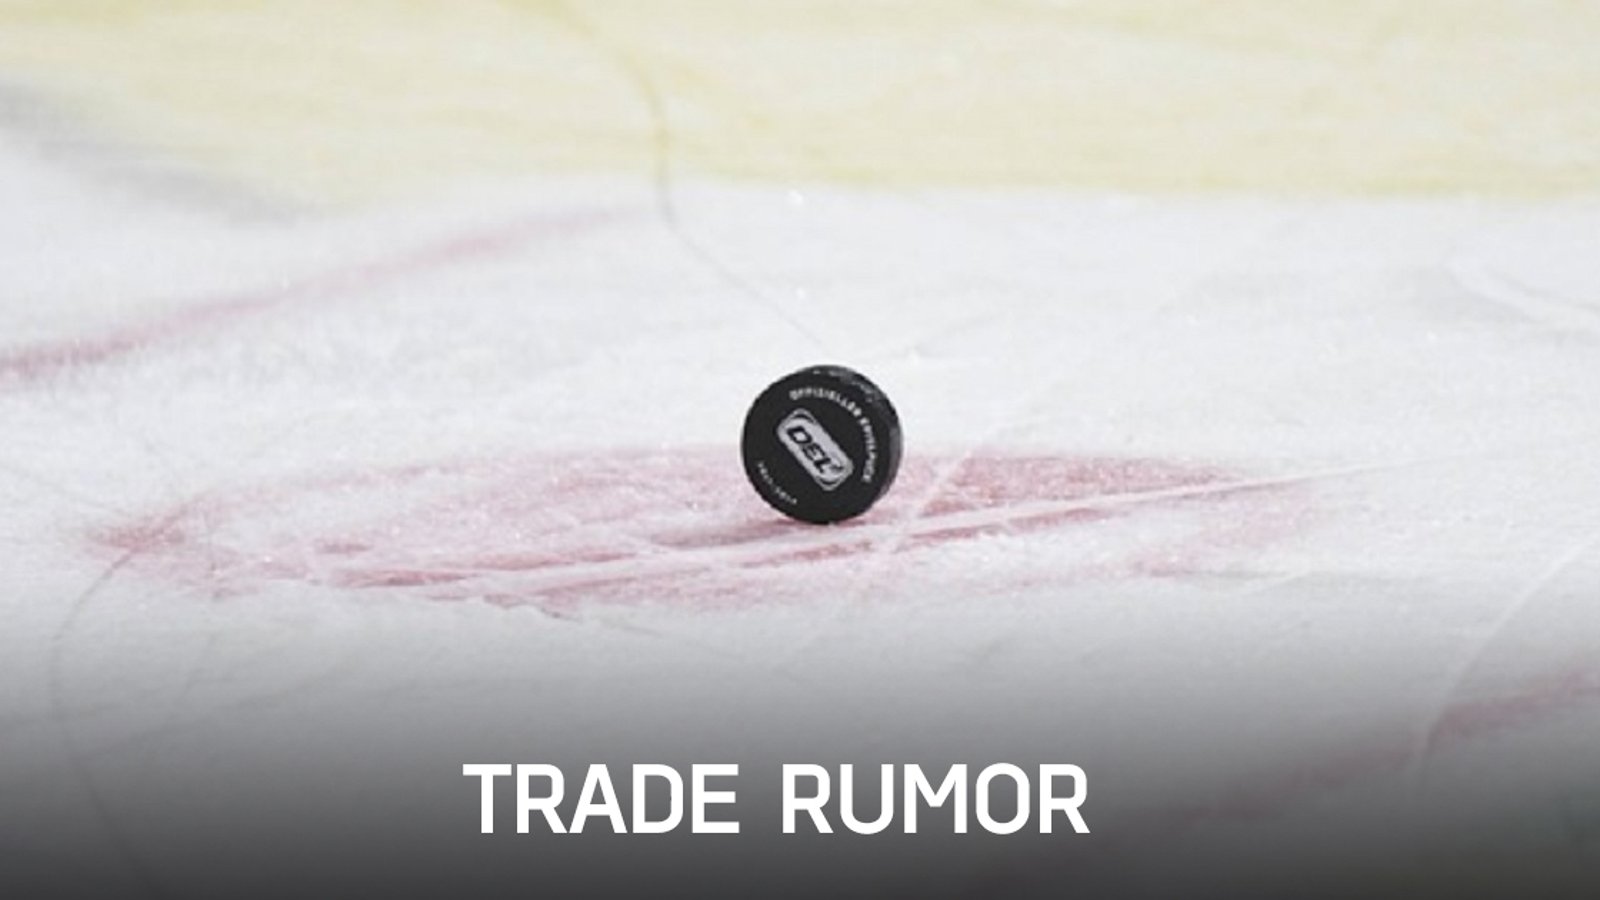 NHL GM admits he has 'some things percolating' on the trade front.